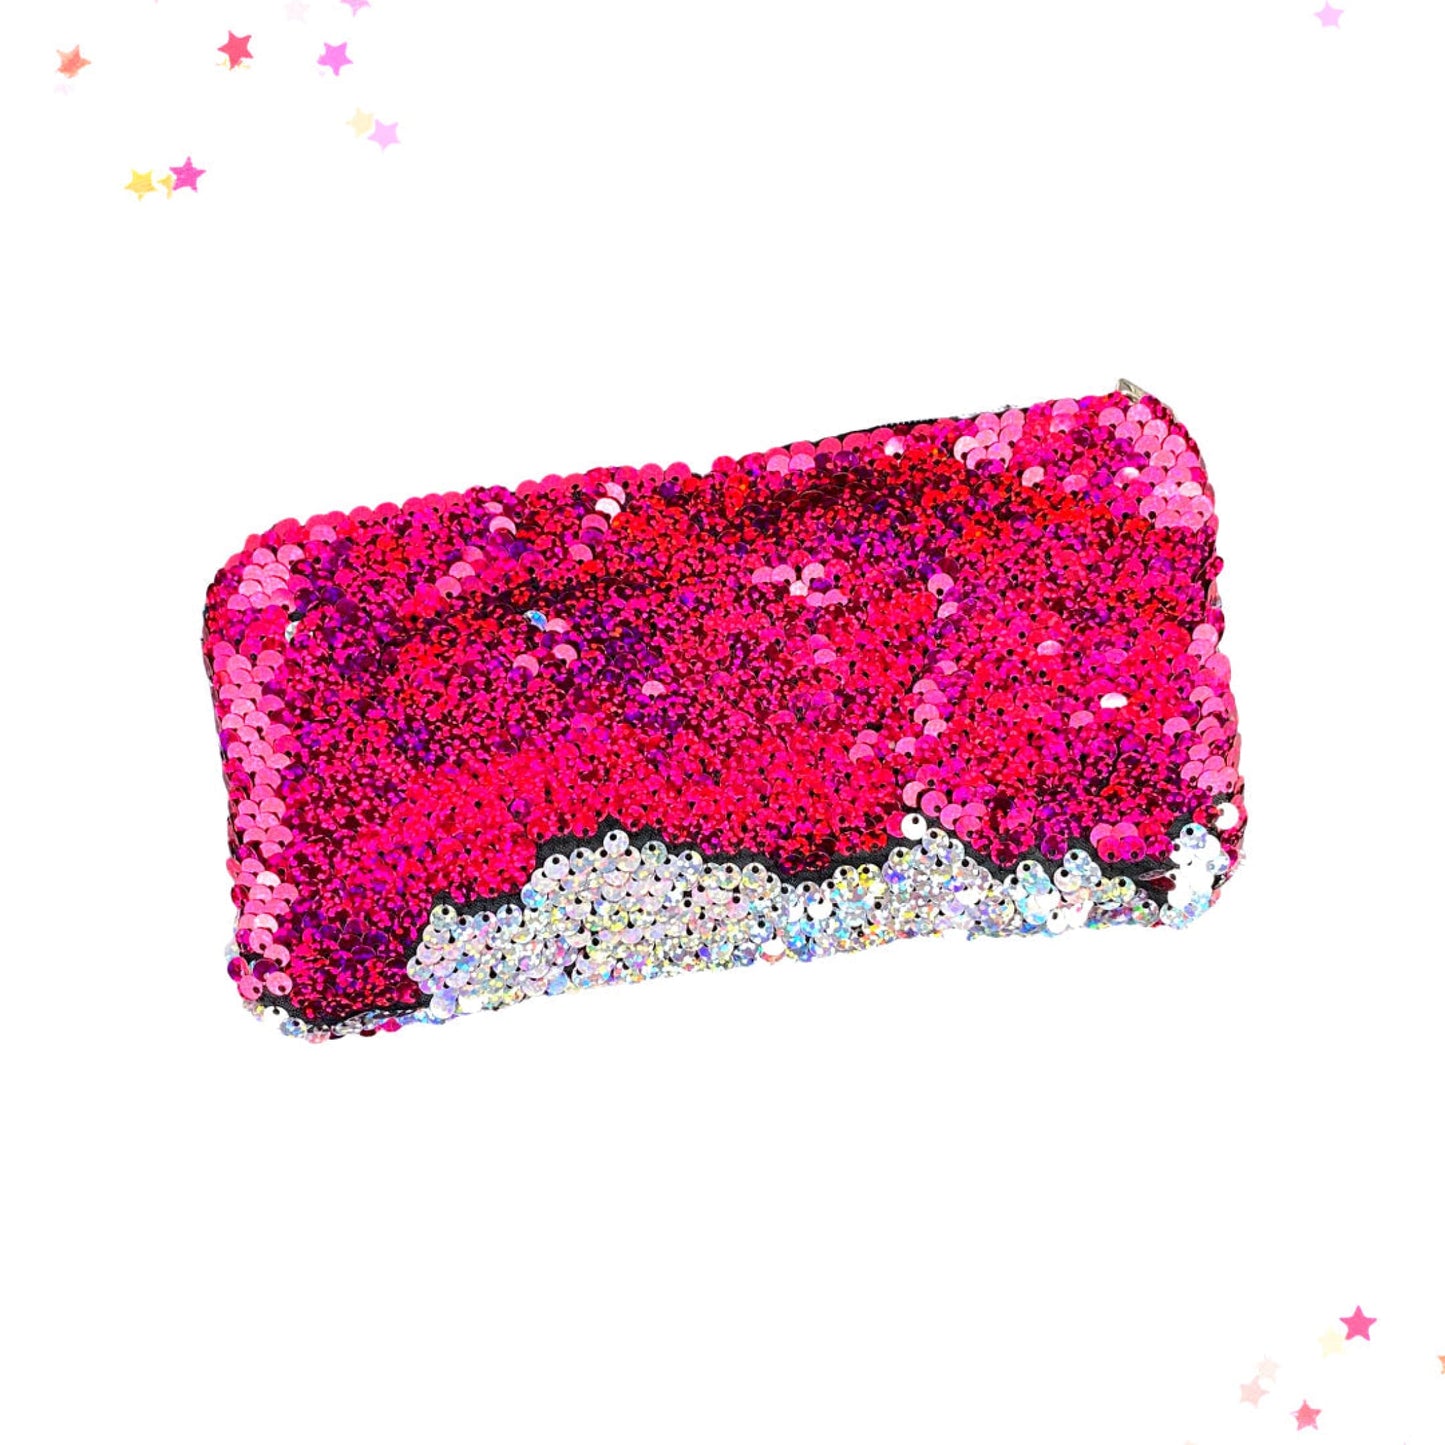 Sequin Pencil Case in Holographic Hot Pink and Silver from Confetti Kitty, Only 7.99